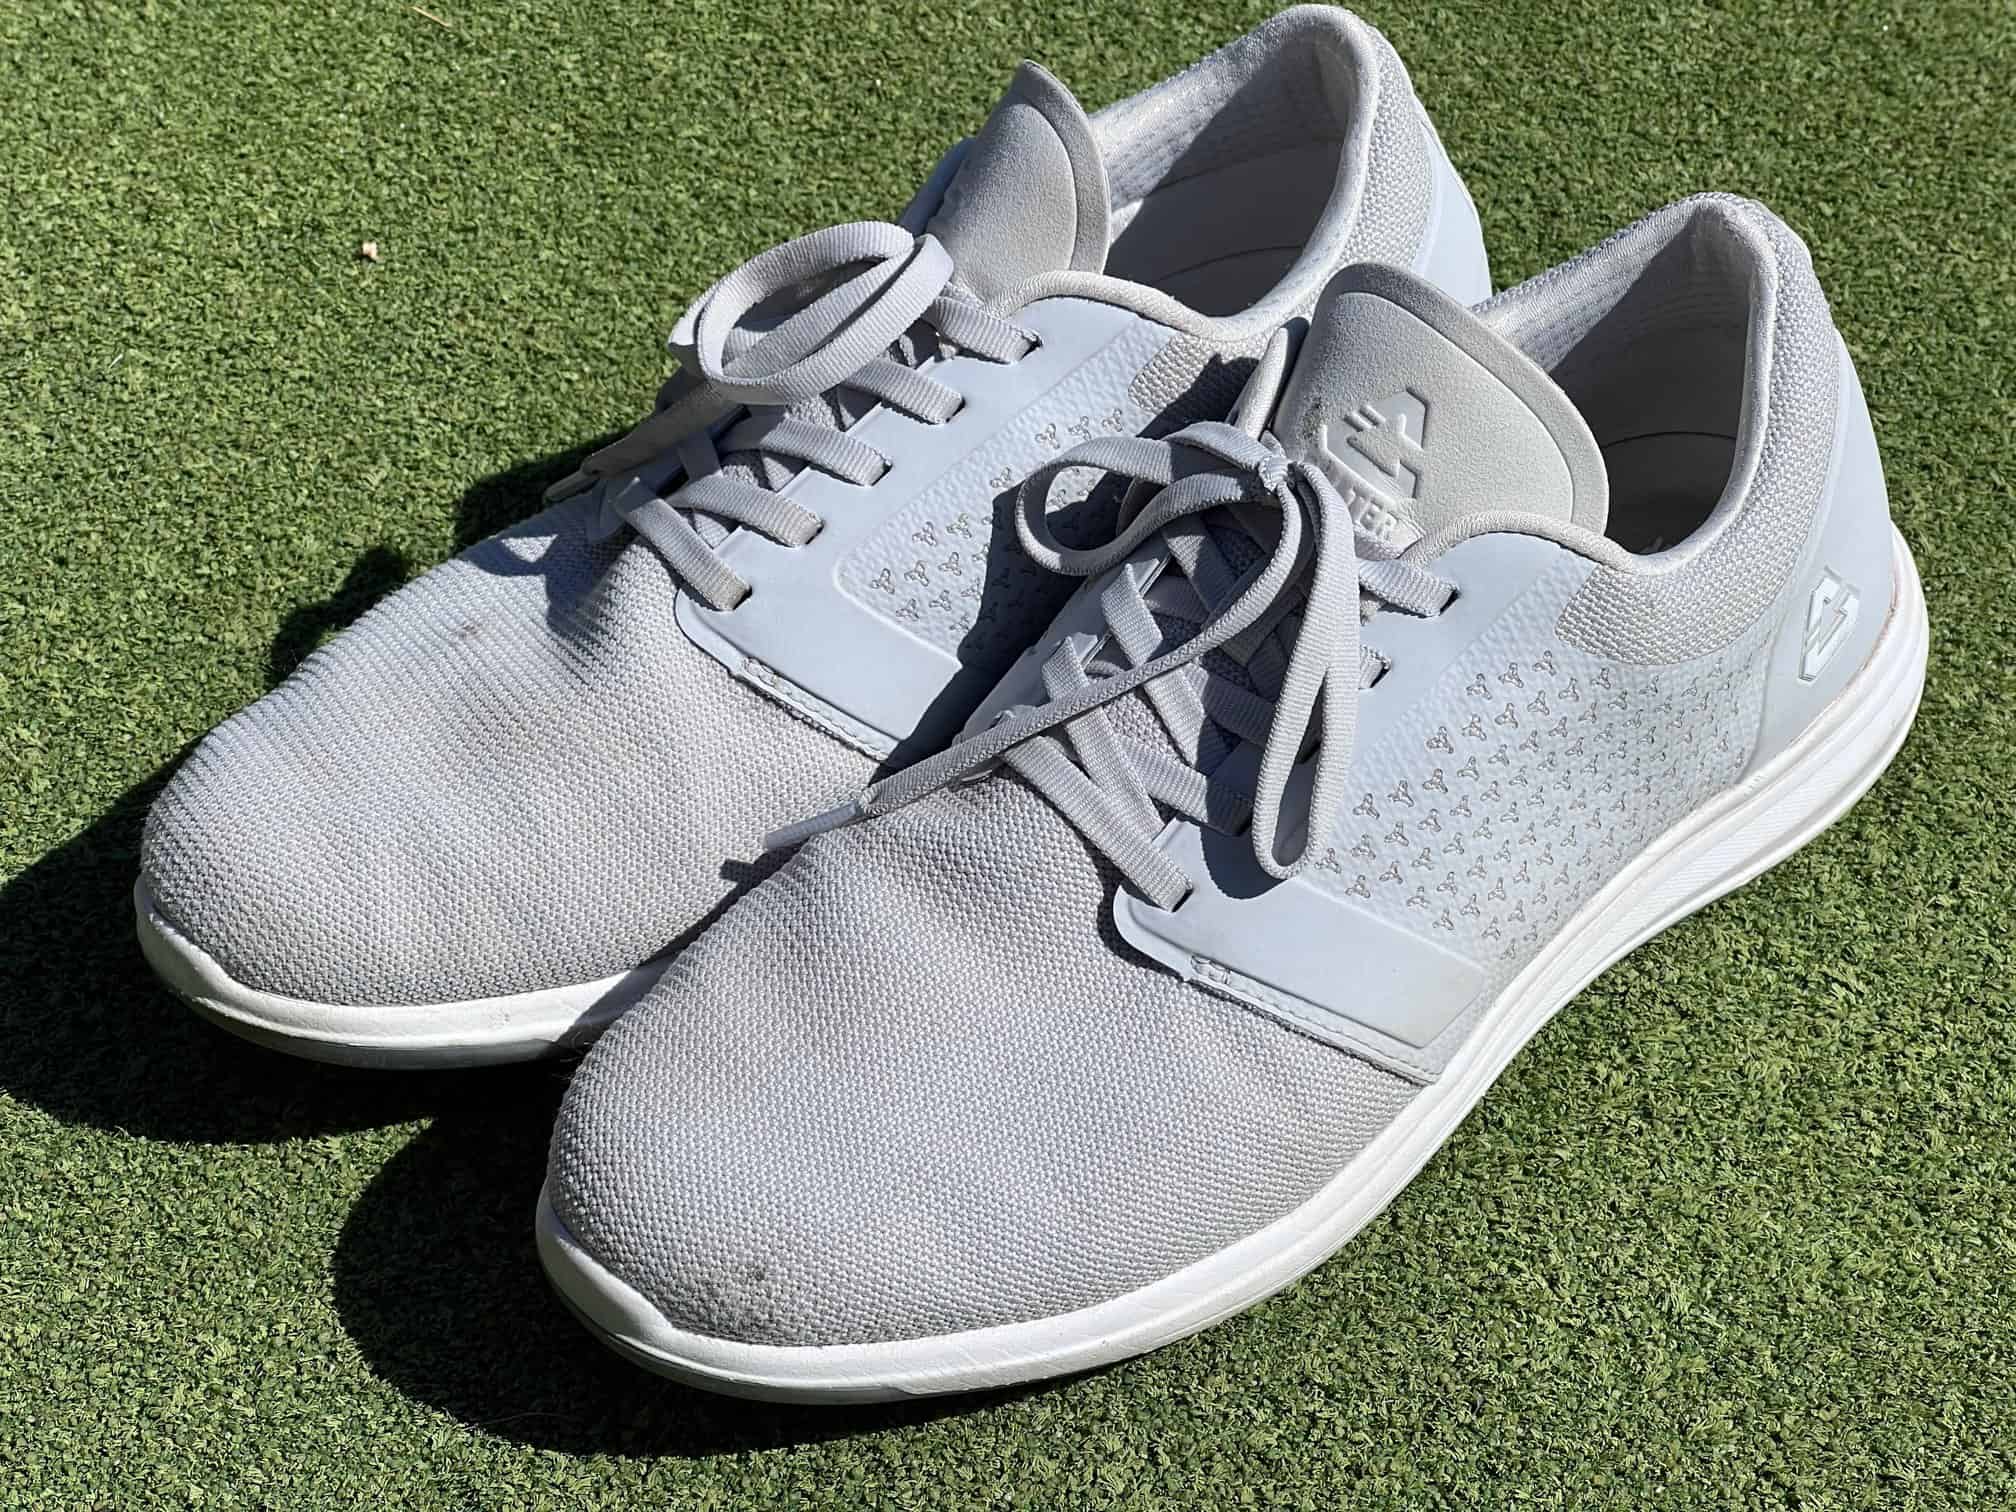 Cuater The Moneymaker And The Daily Shoes Review - Independent Golf Reviews